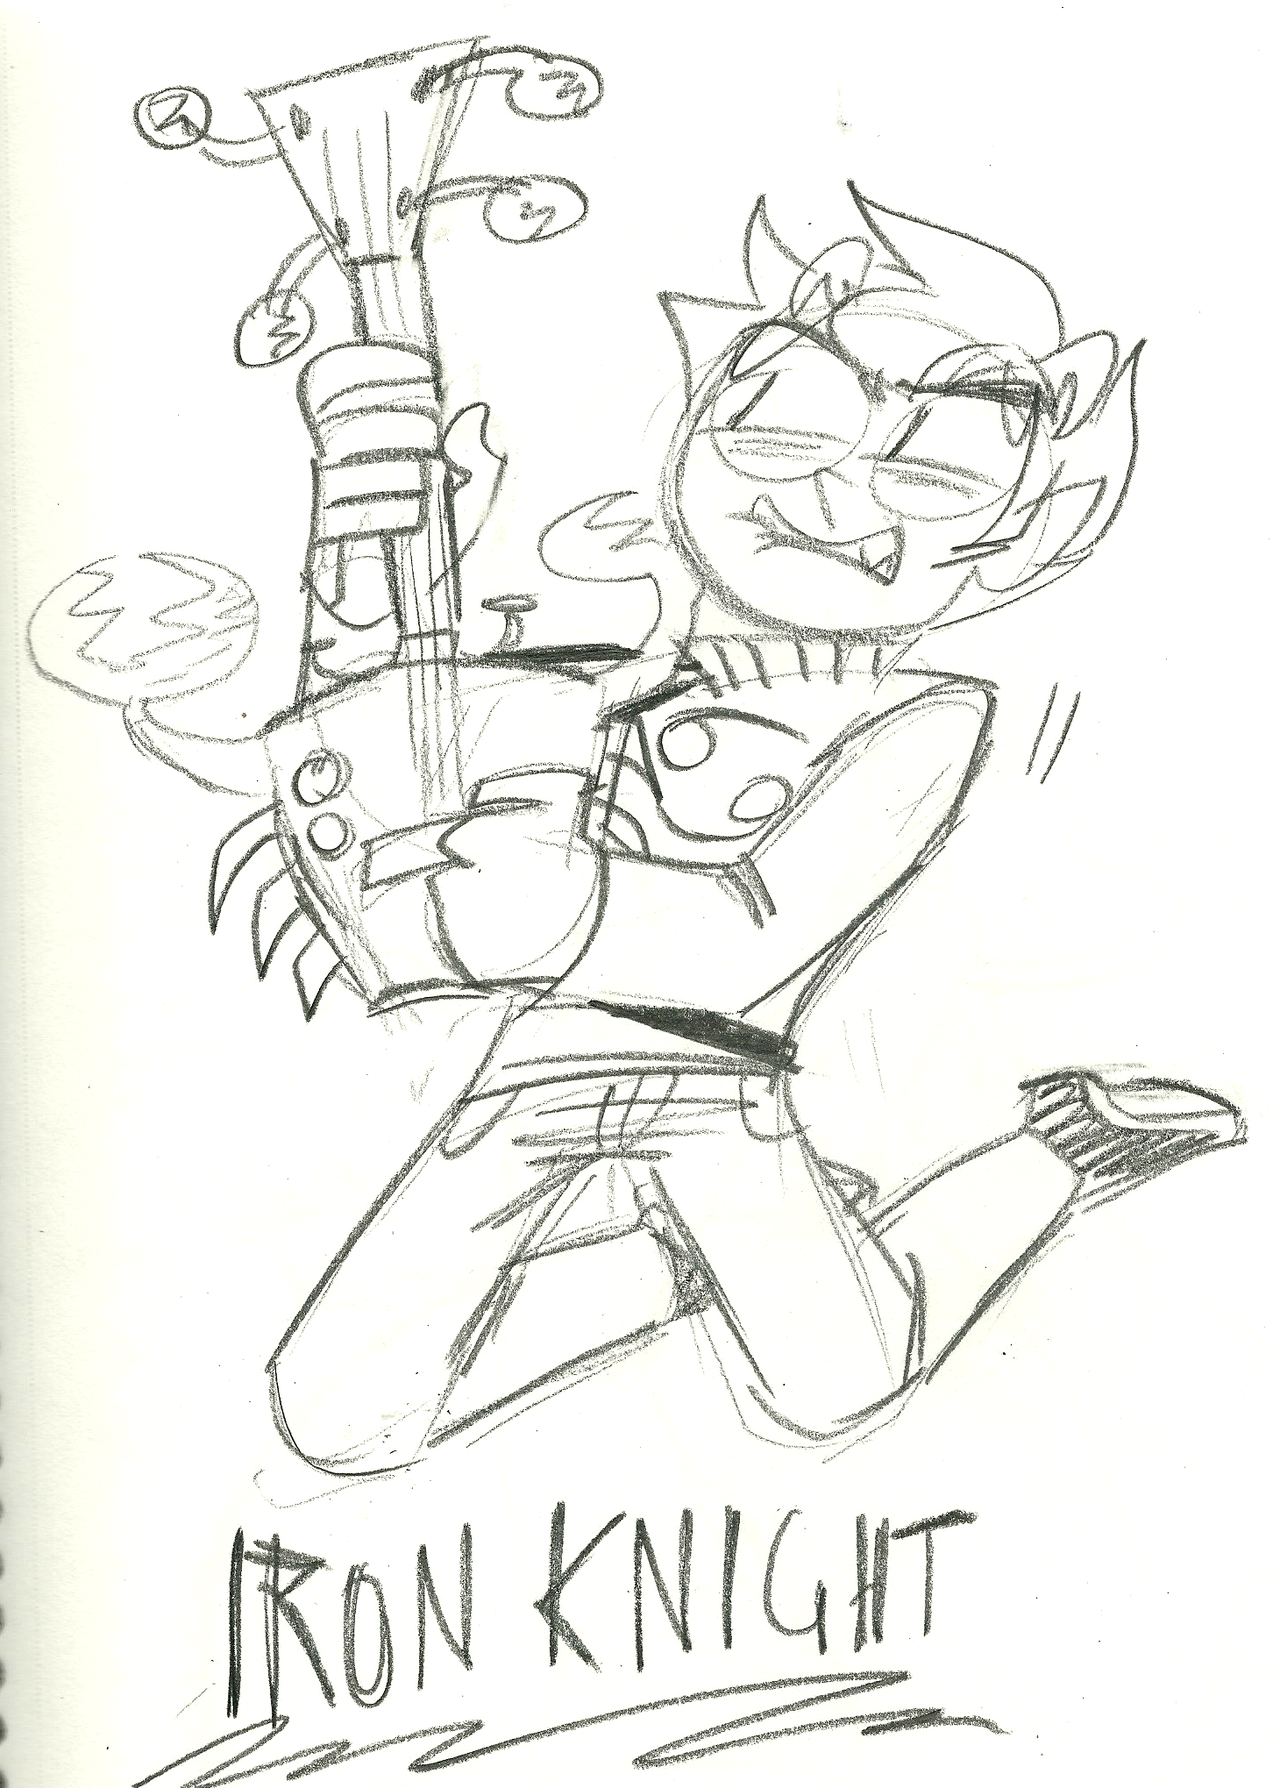 why isnt there more pictures of karkat angrily playing the electric guitar to his